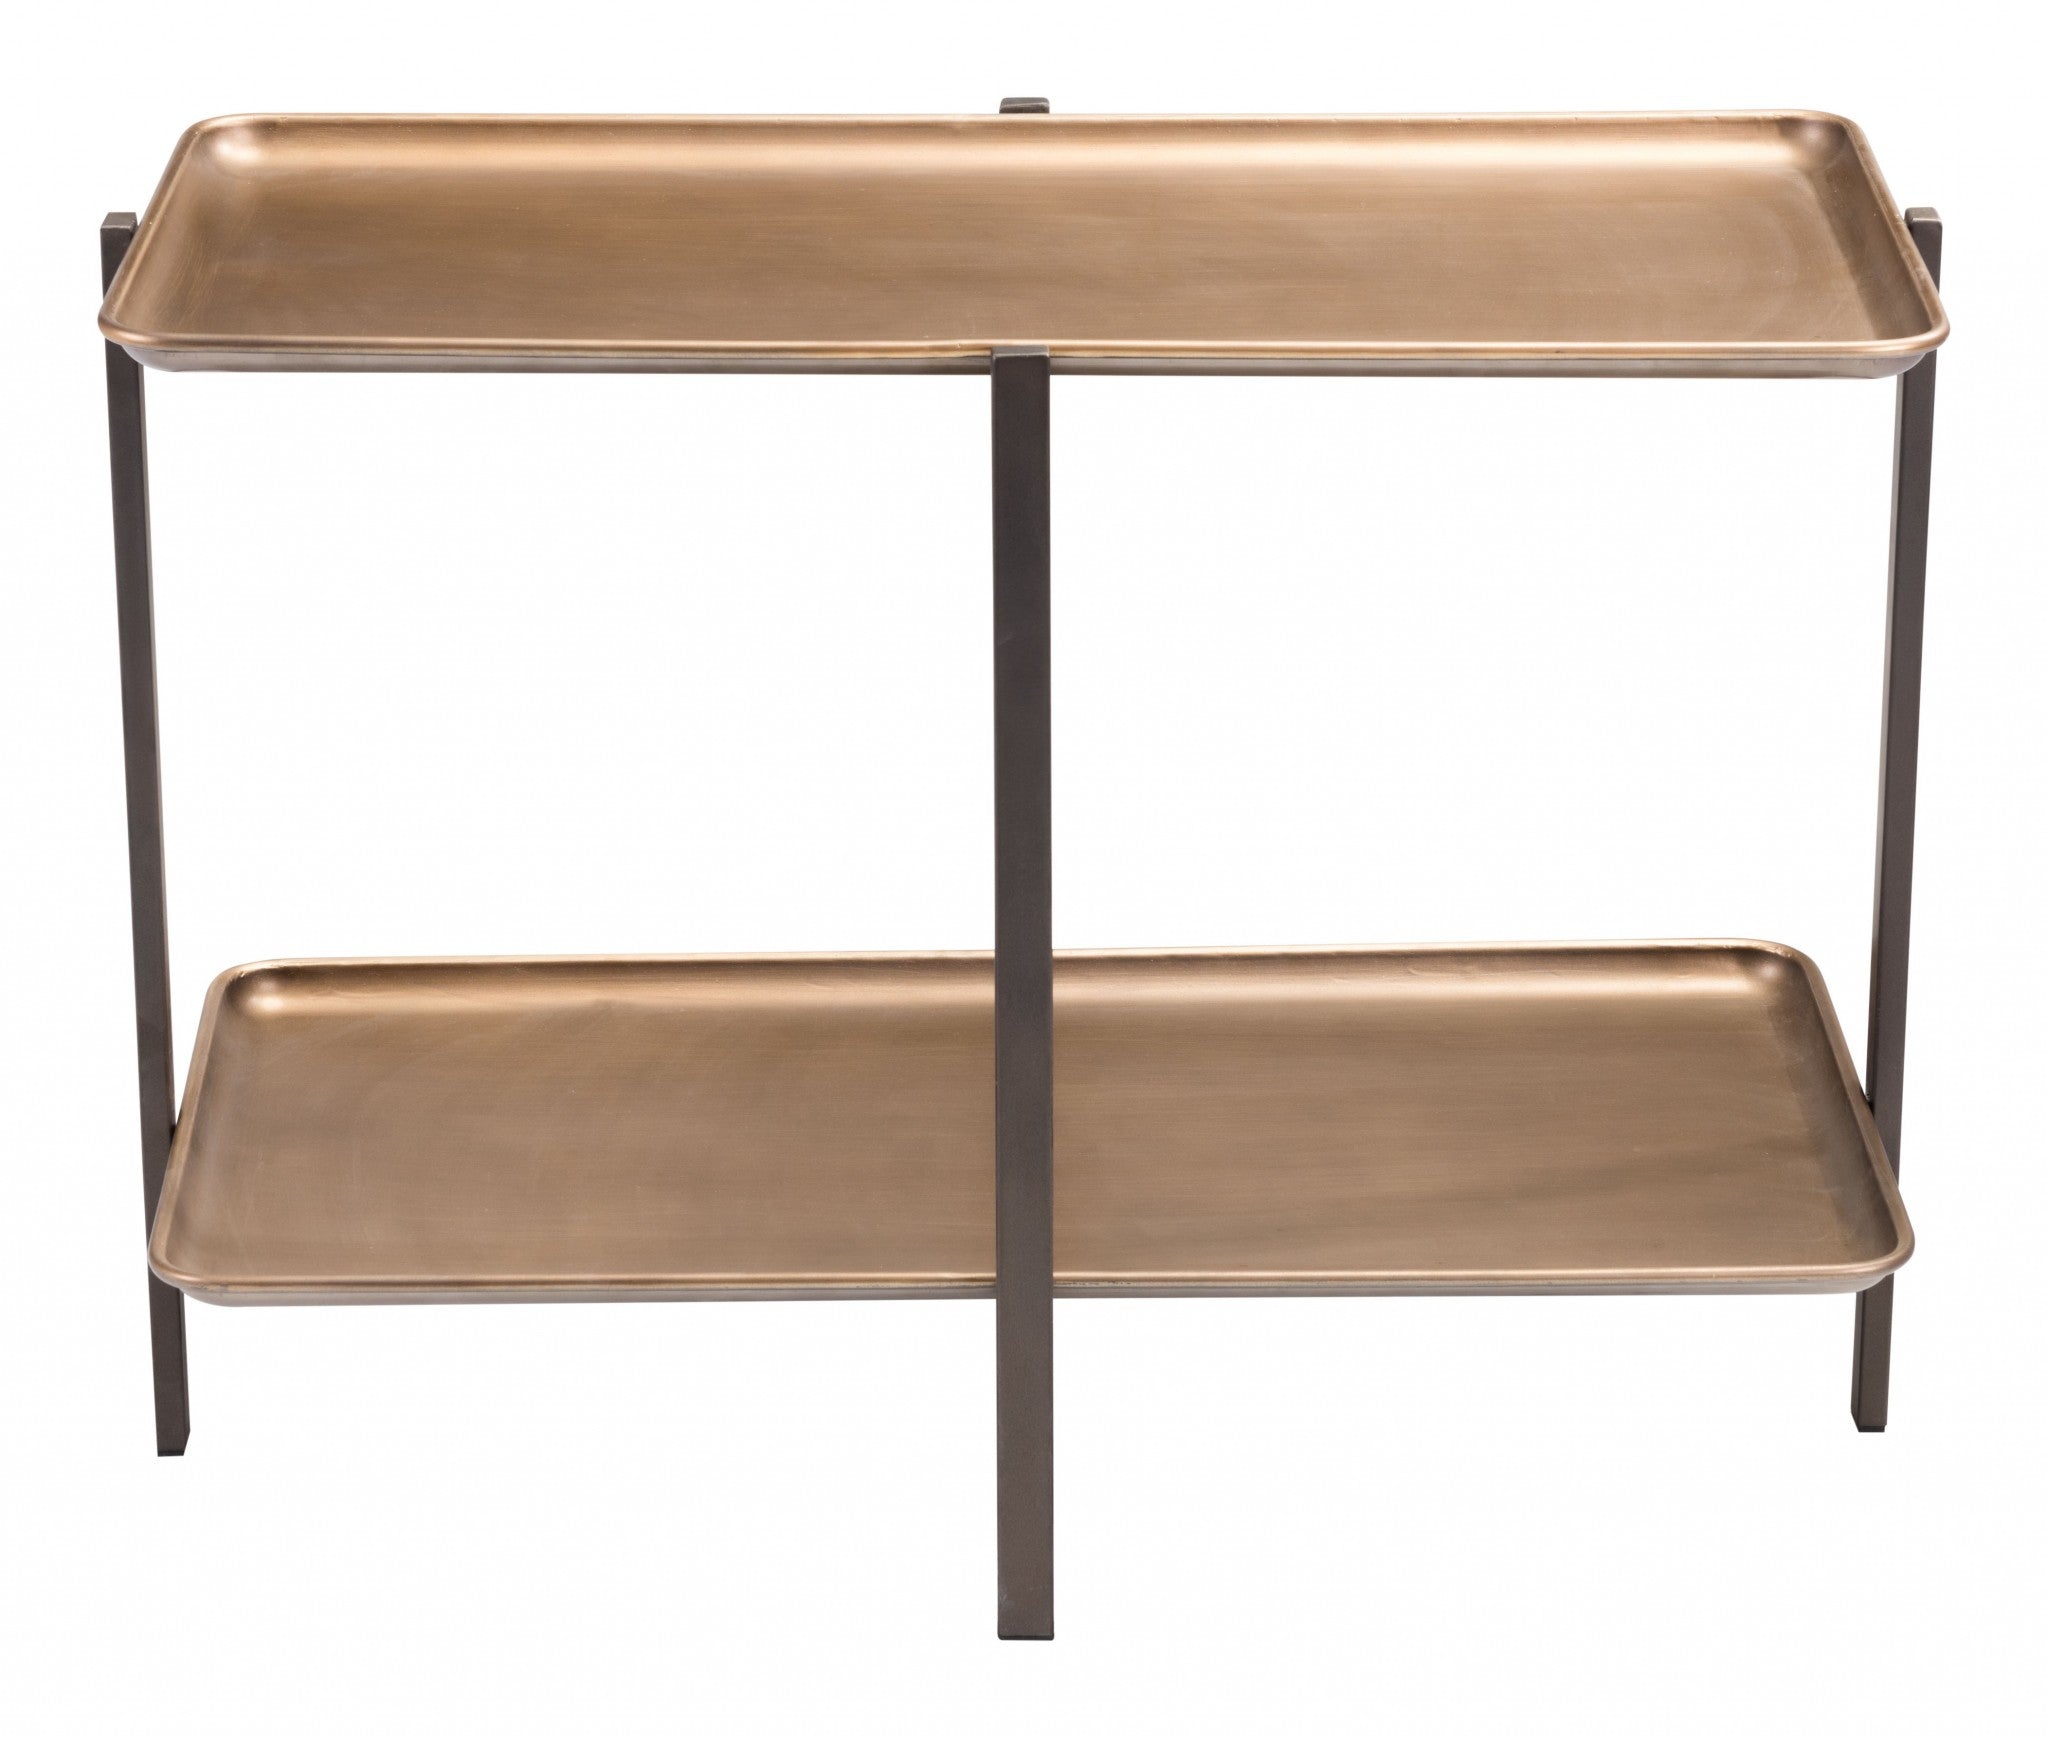 33" Gold And Black Steel Coffee Table With Shelf